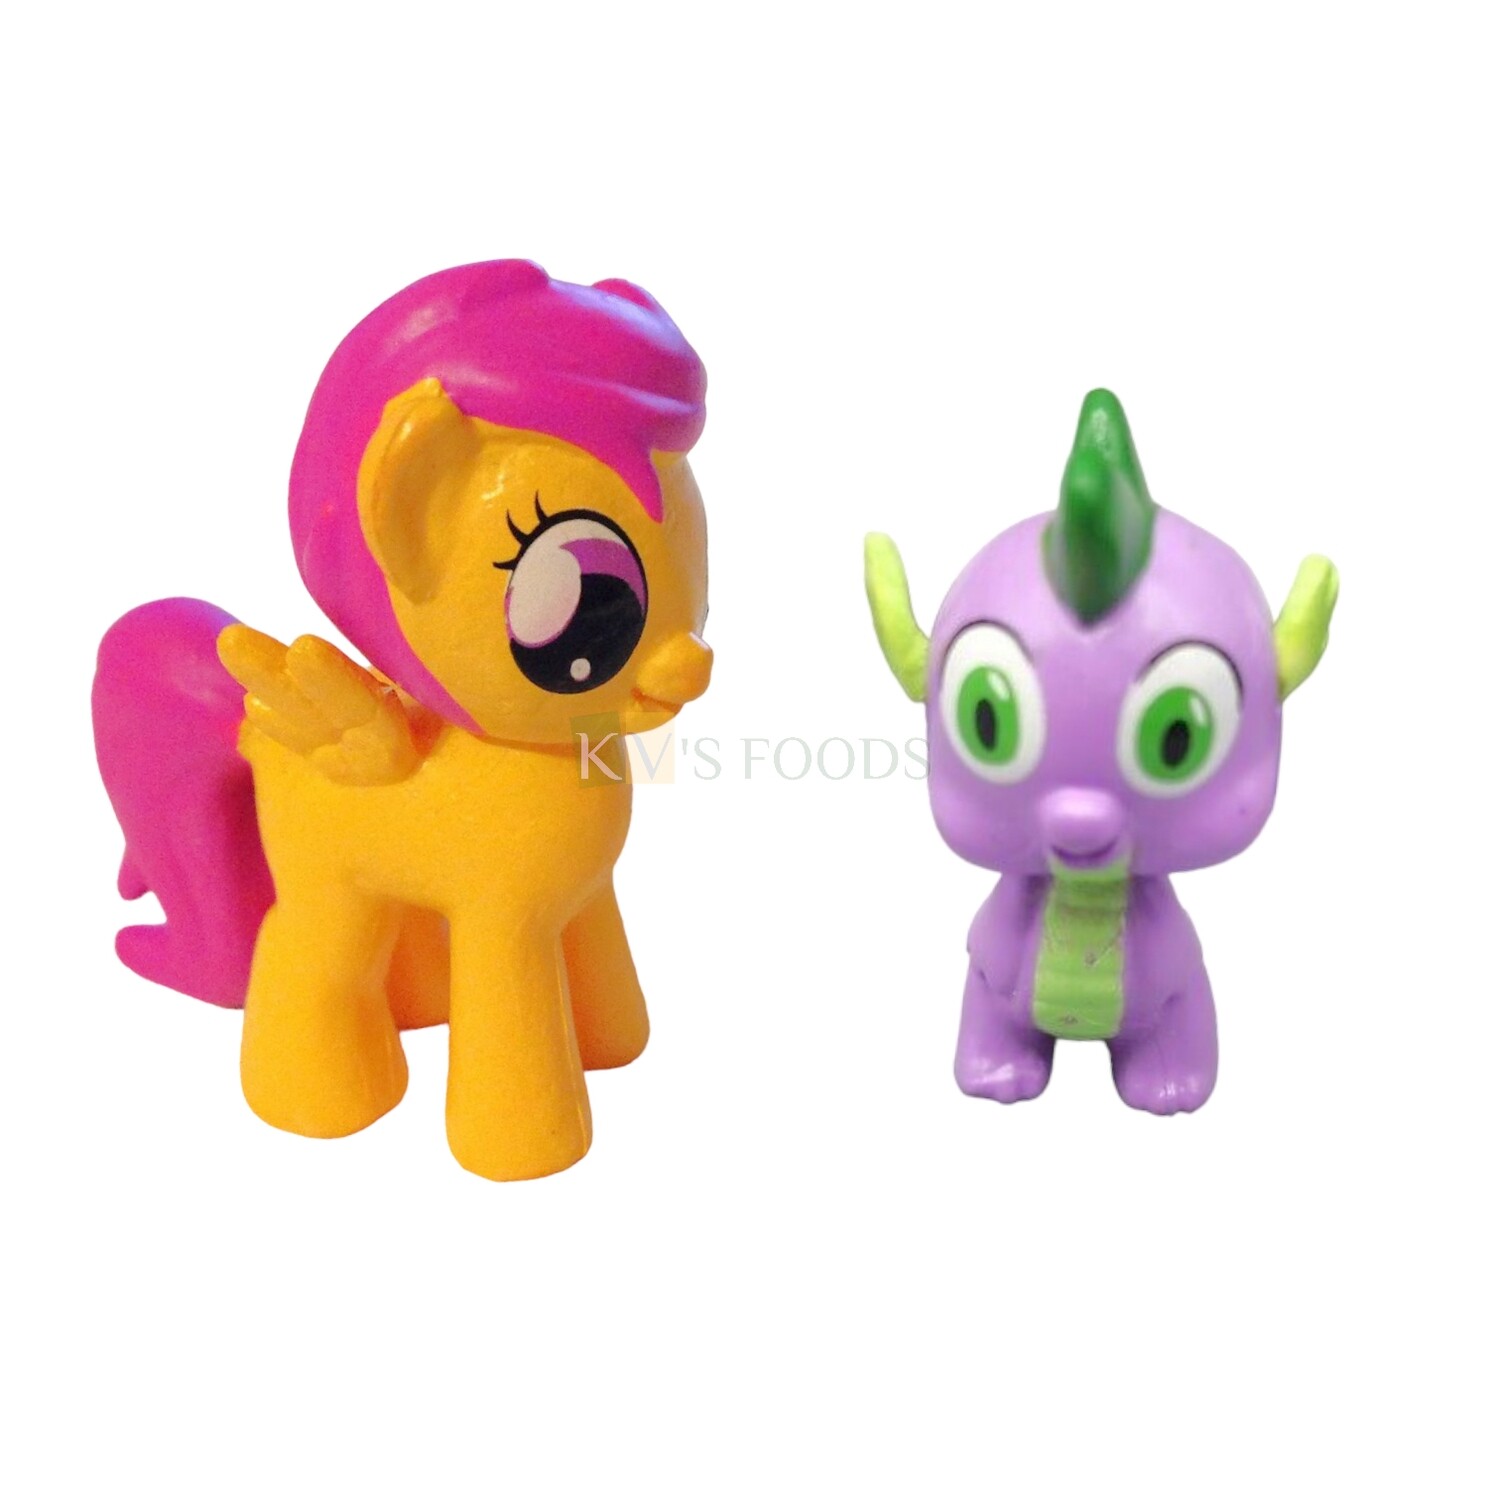 2pcs My Little Pony G4 Busy Book Scootaloo & Spike Miniature Figurine Horses, Cake Decoration, Mini Cake Toppers Action Figures, Birthday Party Supplies, Children's Play Toys, Desktop Ornament